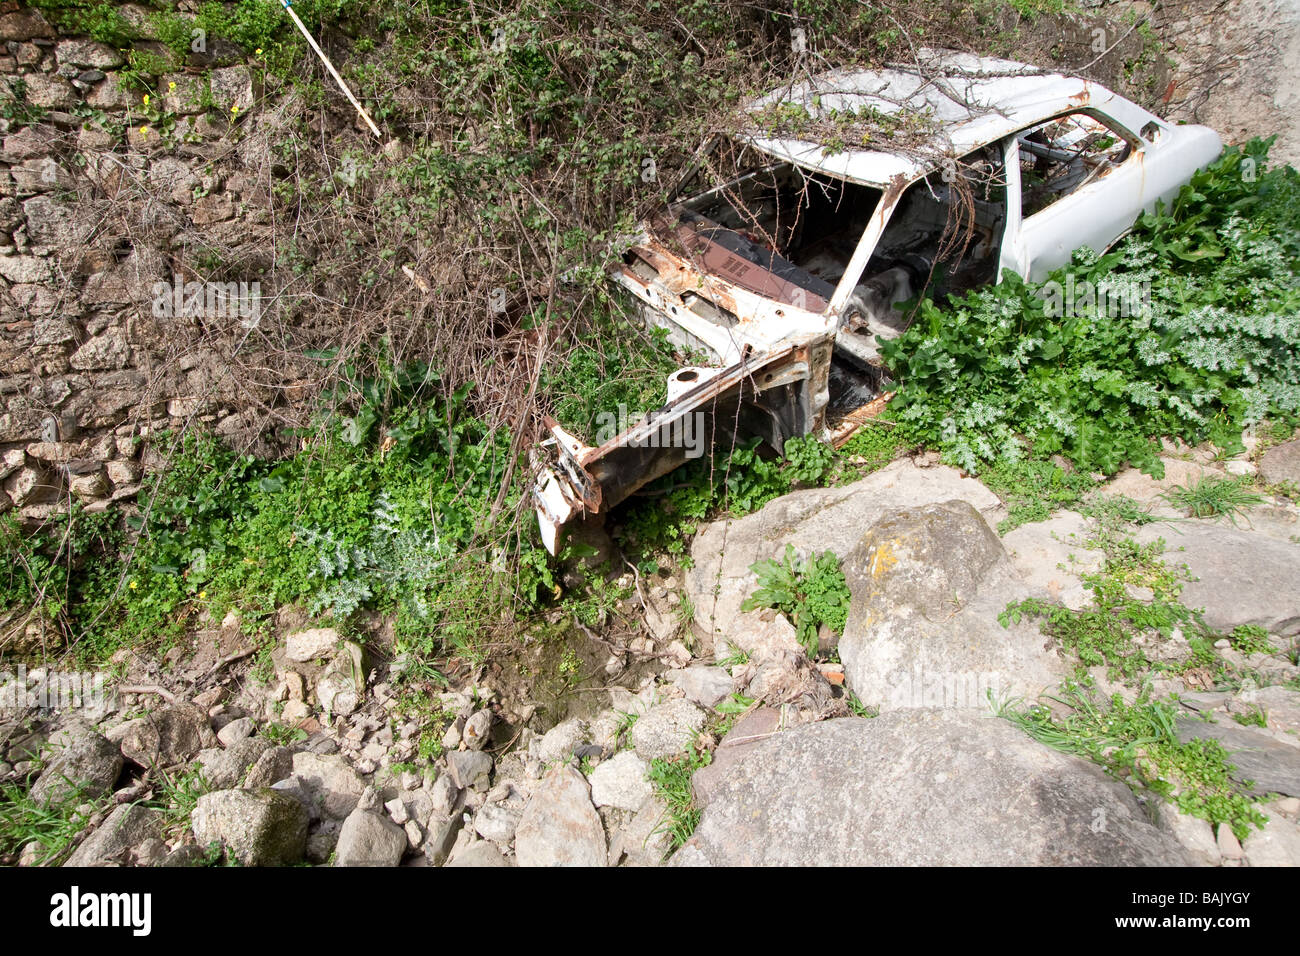 Old 1970's / 1980's Toyota or Datsun wrecked and abandoned in a creek. Stock Photo